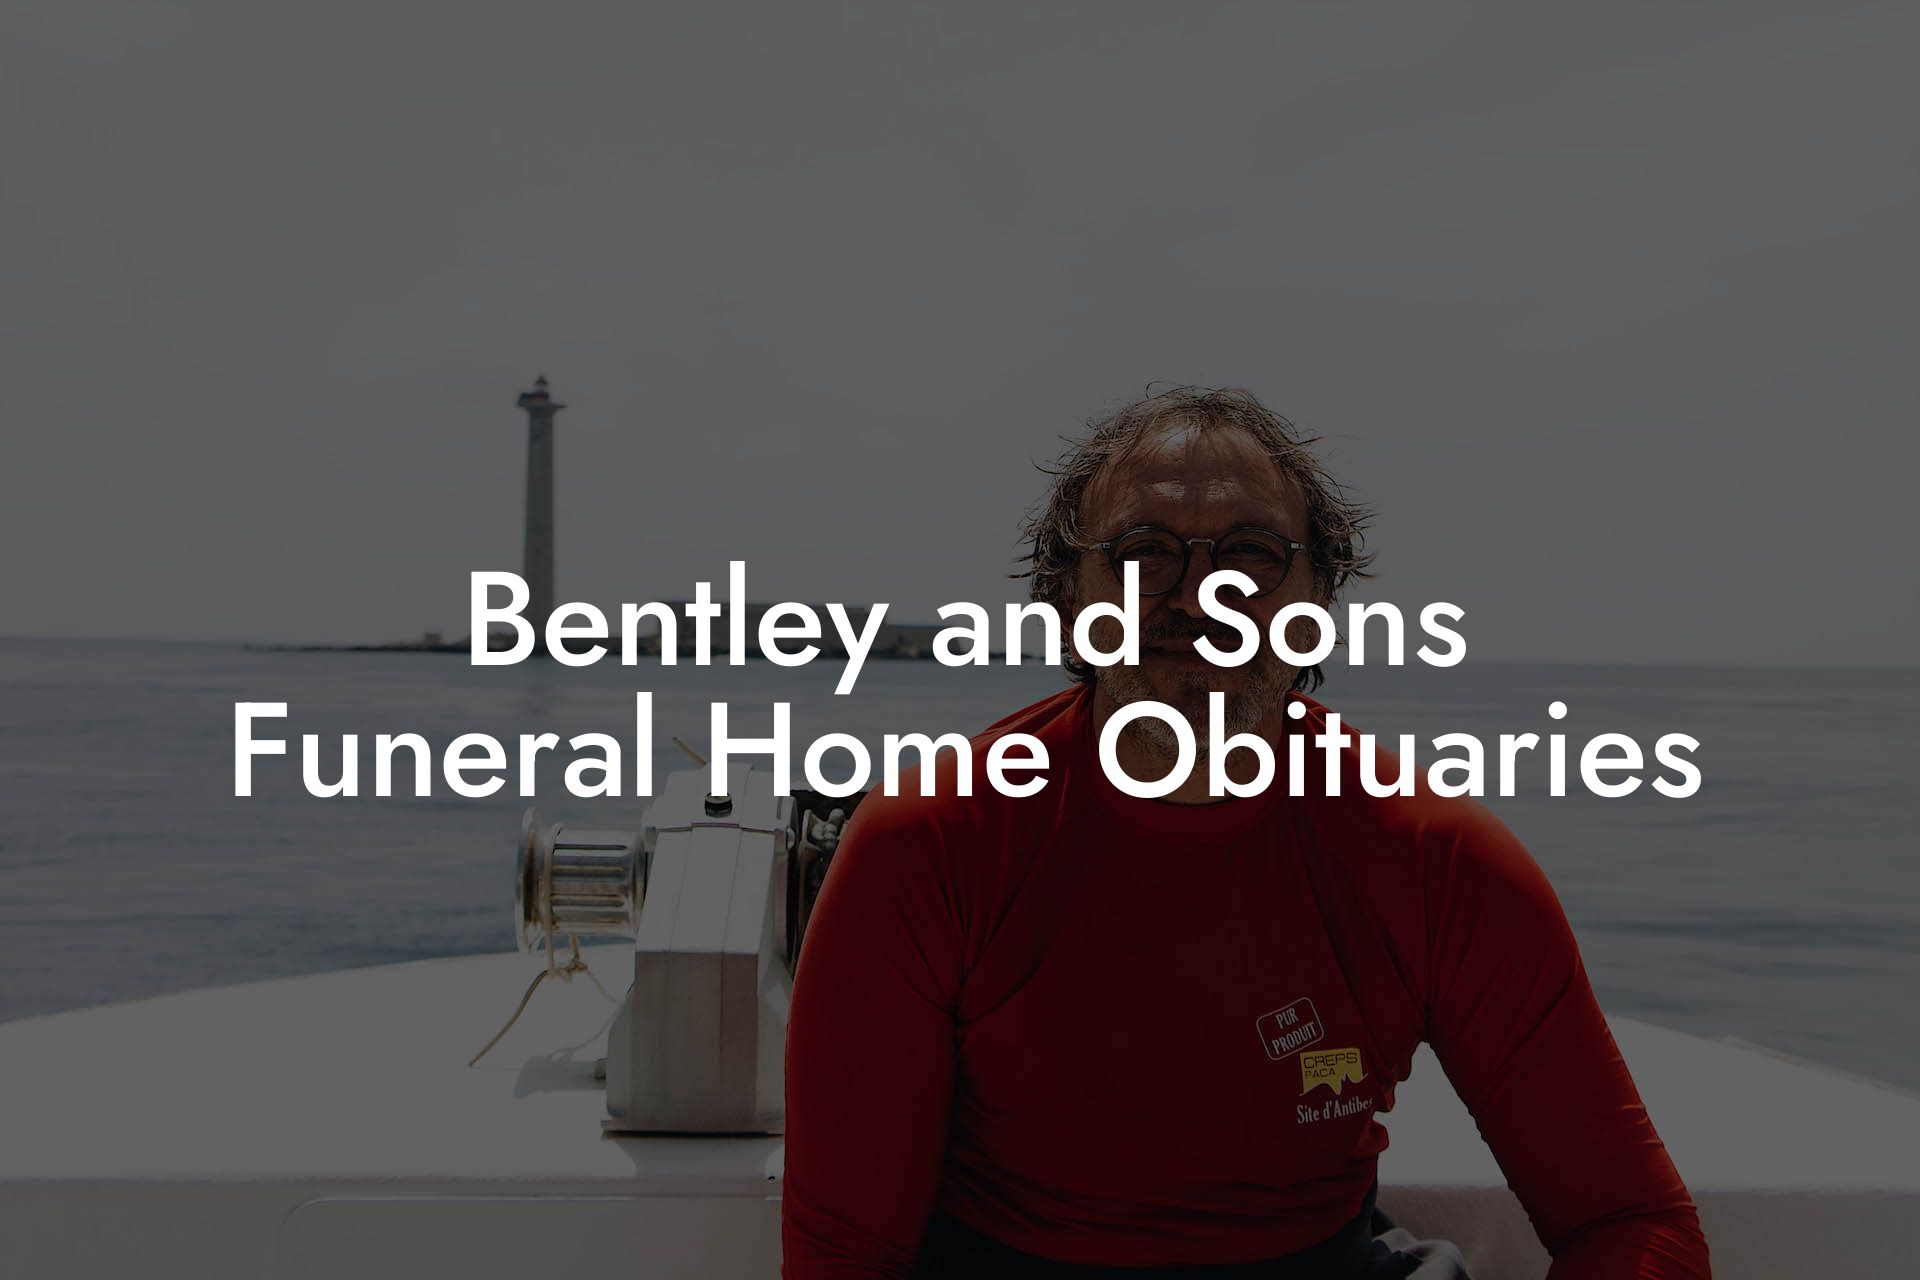 Bentley and Sons Funeral Home Obituaries